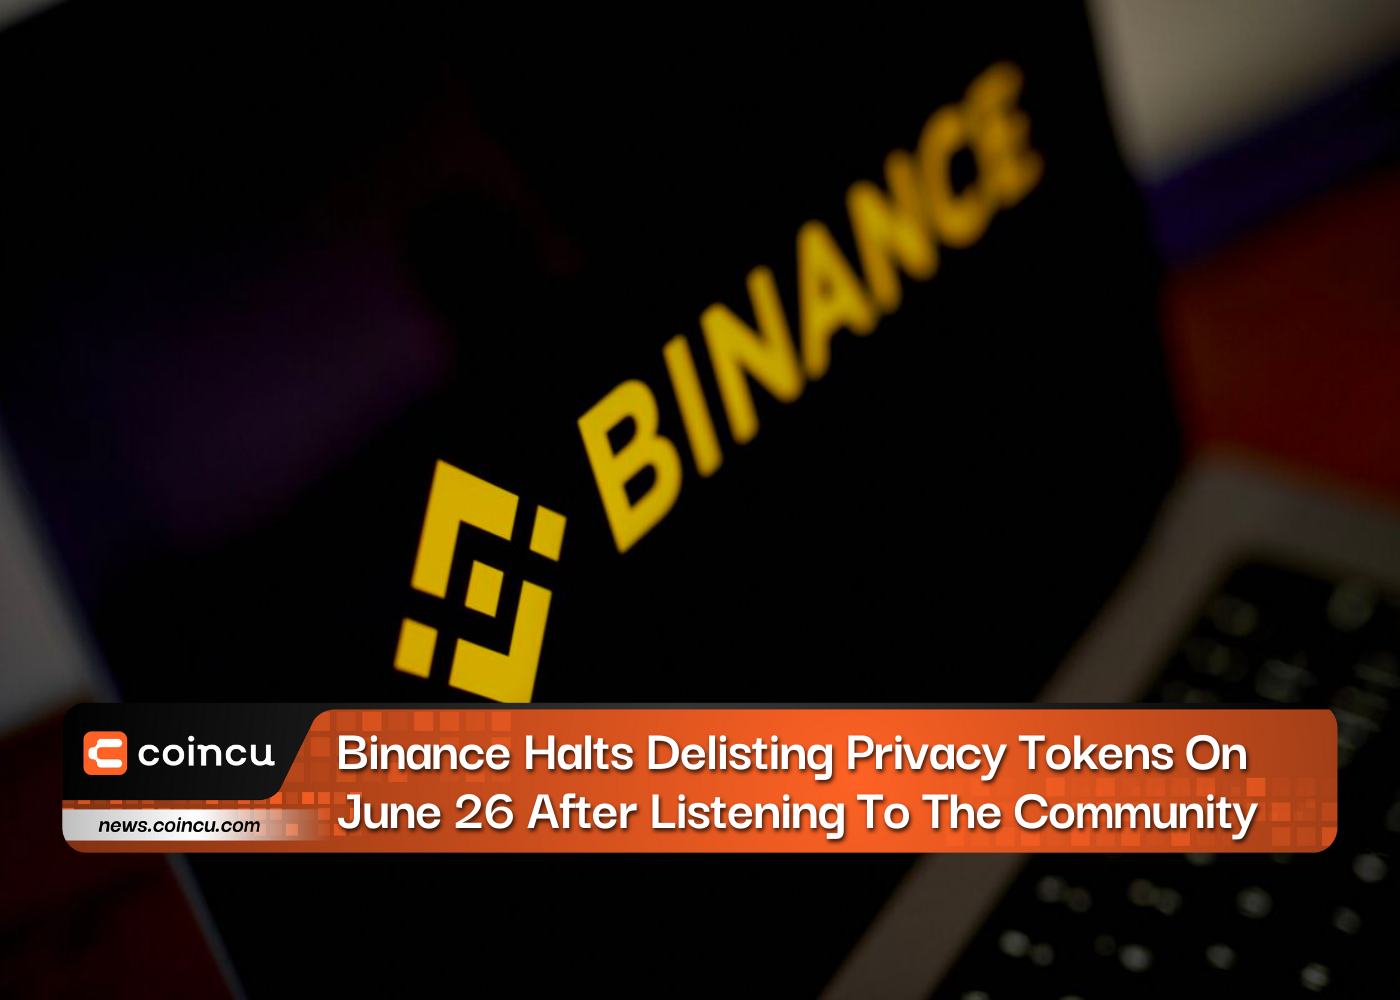 Binance Halts Delisting Privacy Tokens On June 26 After Listening To The Community